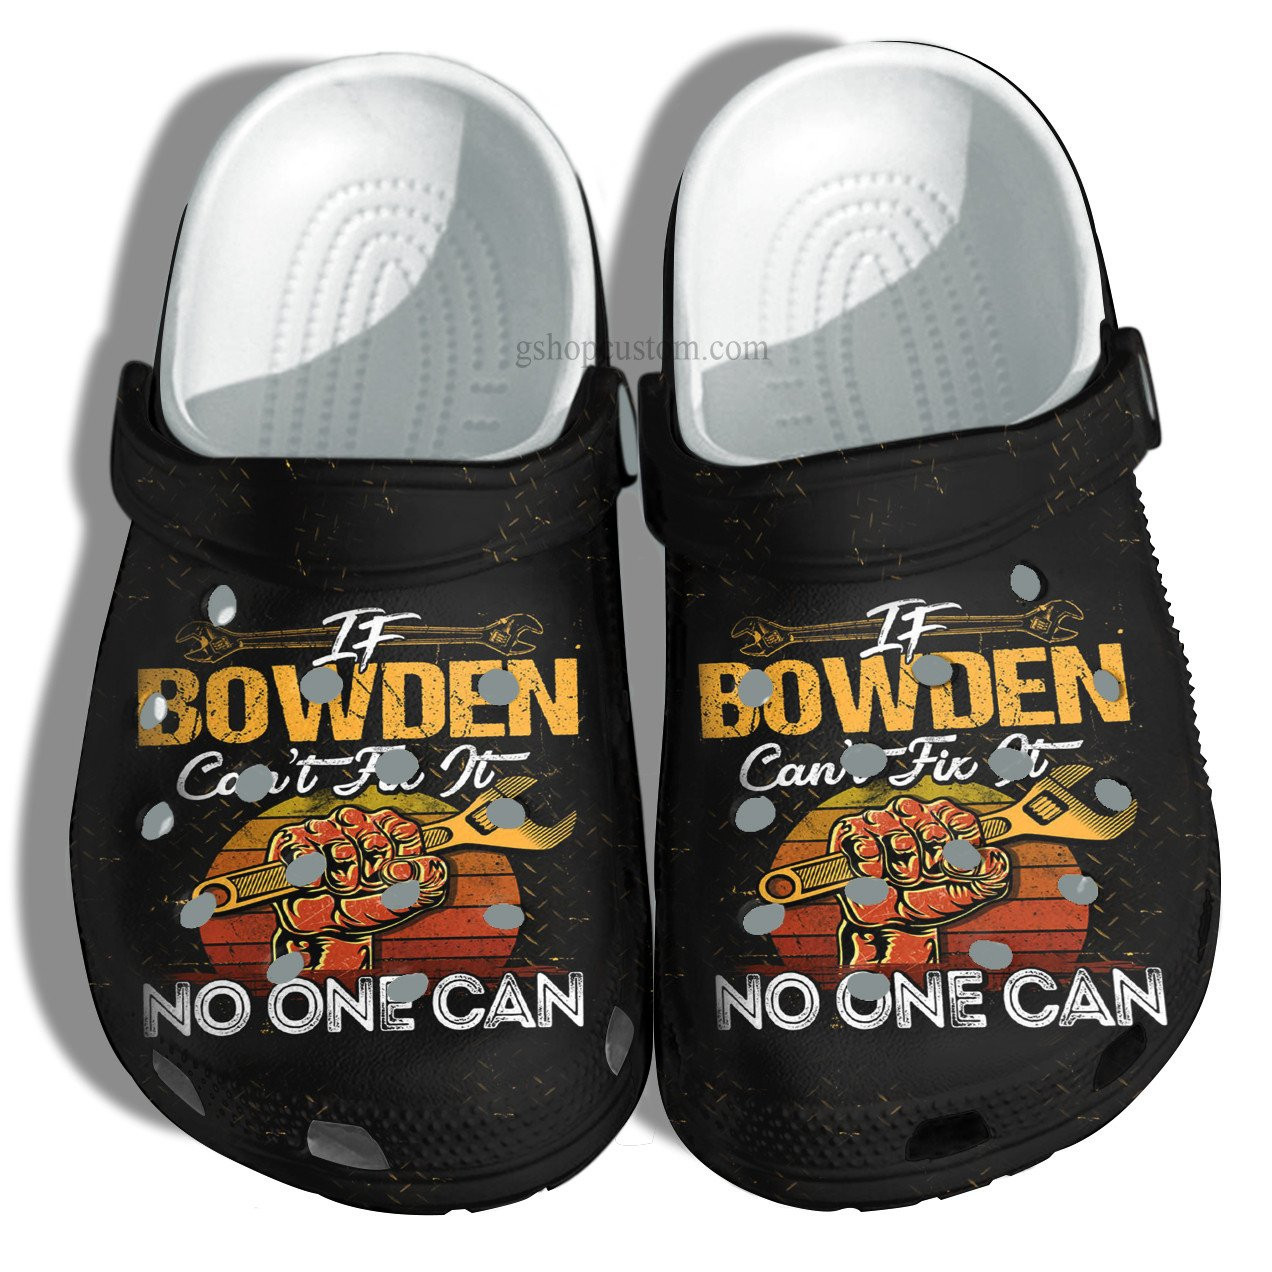 Bowden Cant Fix It No One Can Croc Crocs Clog Shoes Father Day Gift- Men Can Fix Anything Vintage Retro Crocs Clog Shoes Gift Grandpa